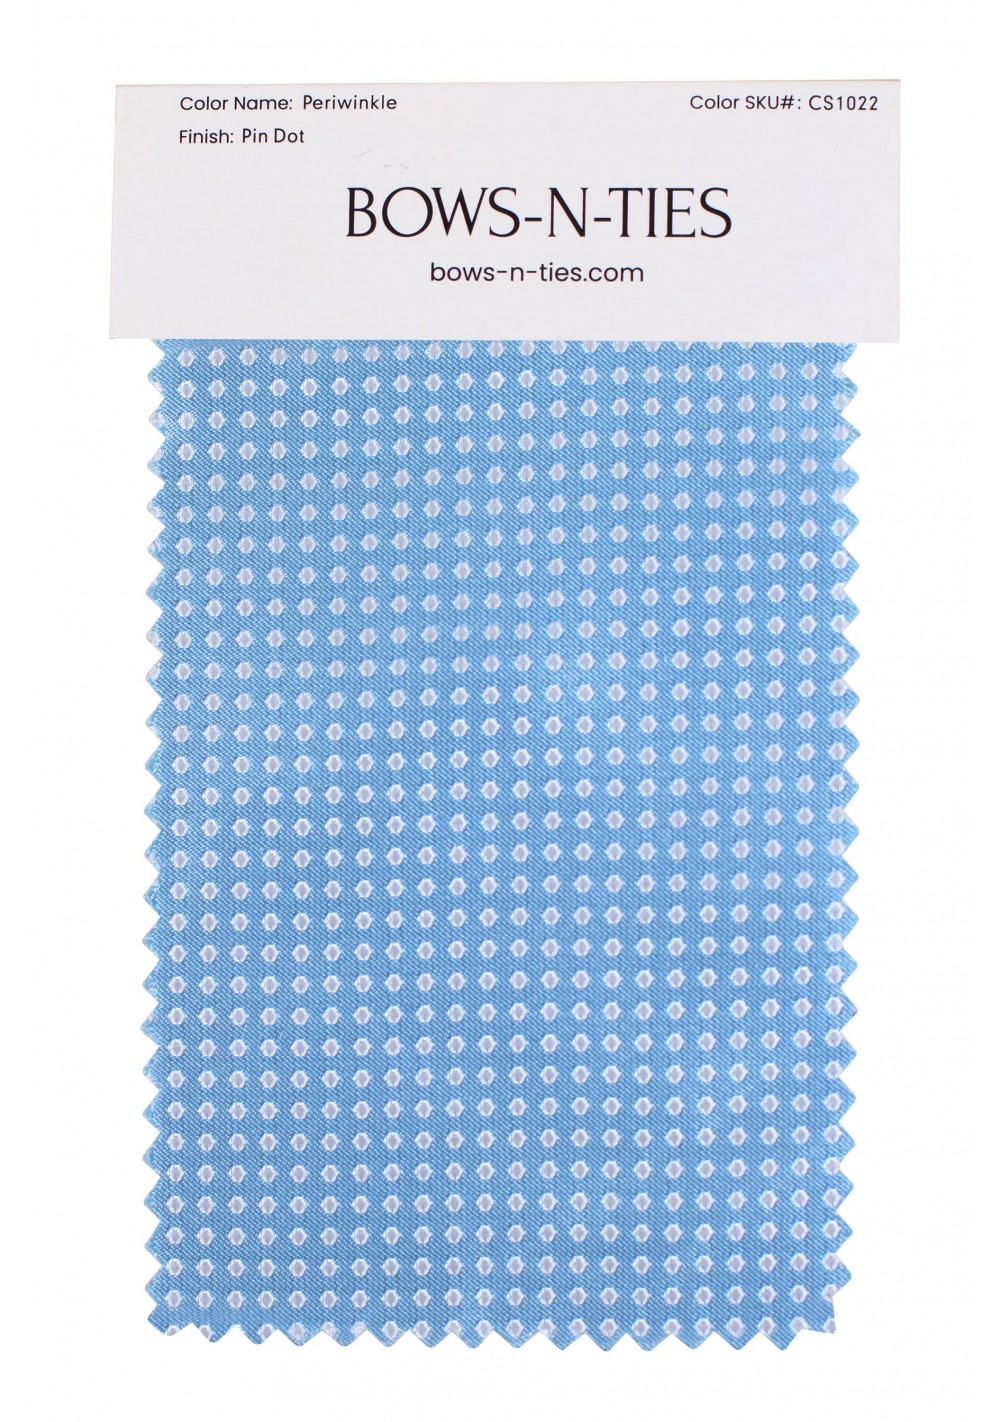 Pin Dot Fabric Swatch - Periwinkle